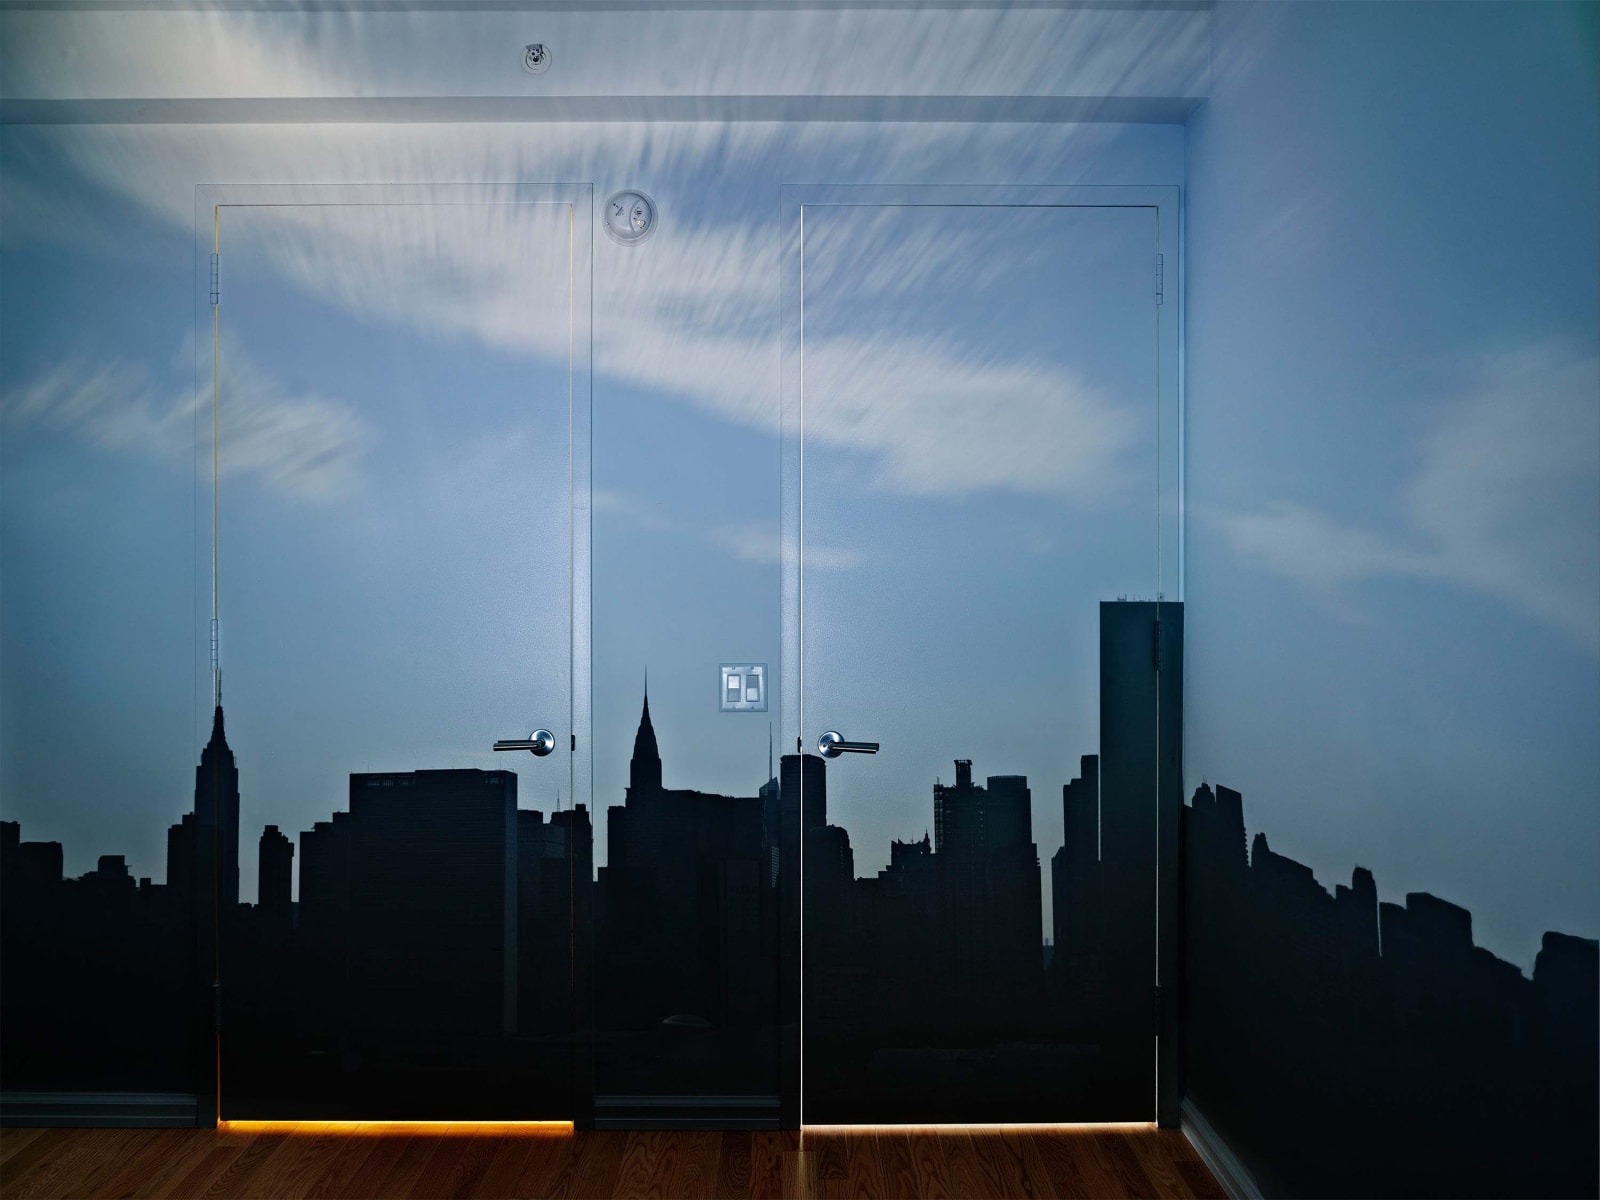 Abelardo Morell Camera Obscura Late Afternoon View of the East Side of Midtown Manhattan dark skyline silhouette projected in empty room with two doors